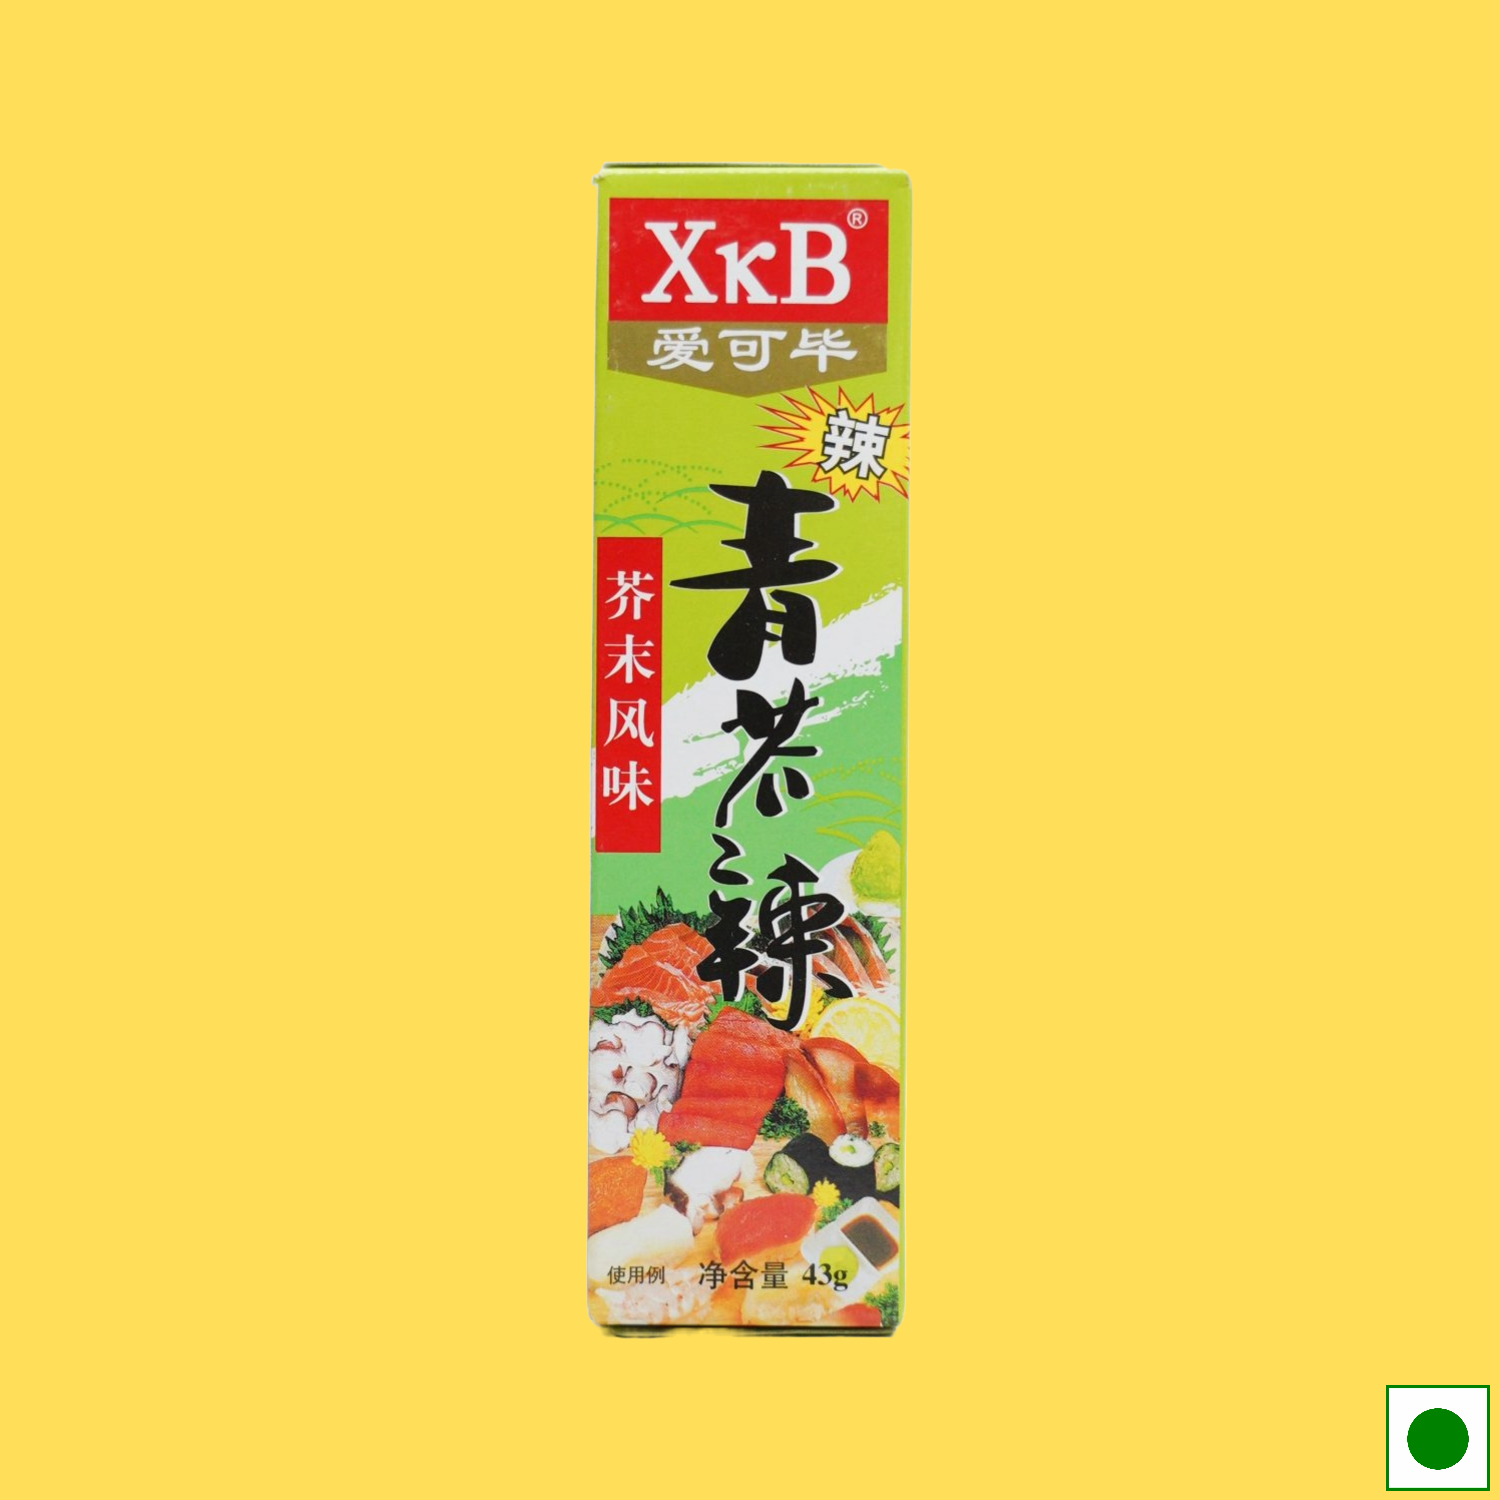 XrB Prepared Wasabi Paste Tube, 43g (Imported)